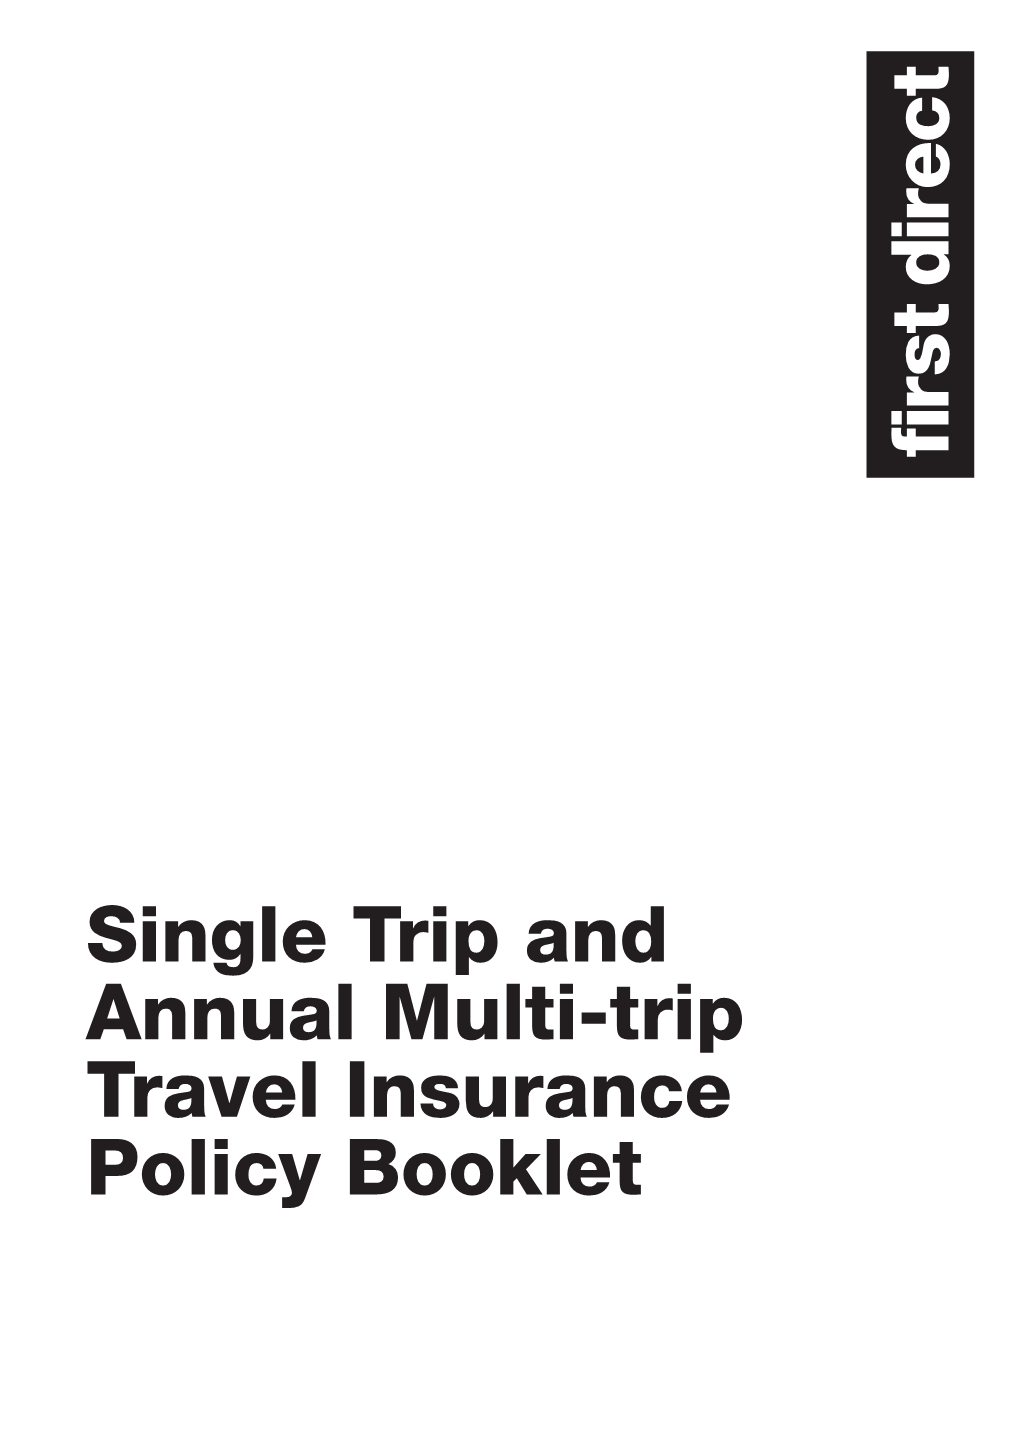 Single Trip and Annual Multi-Trip Travel Insurance Policy Booklet